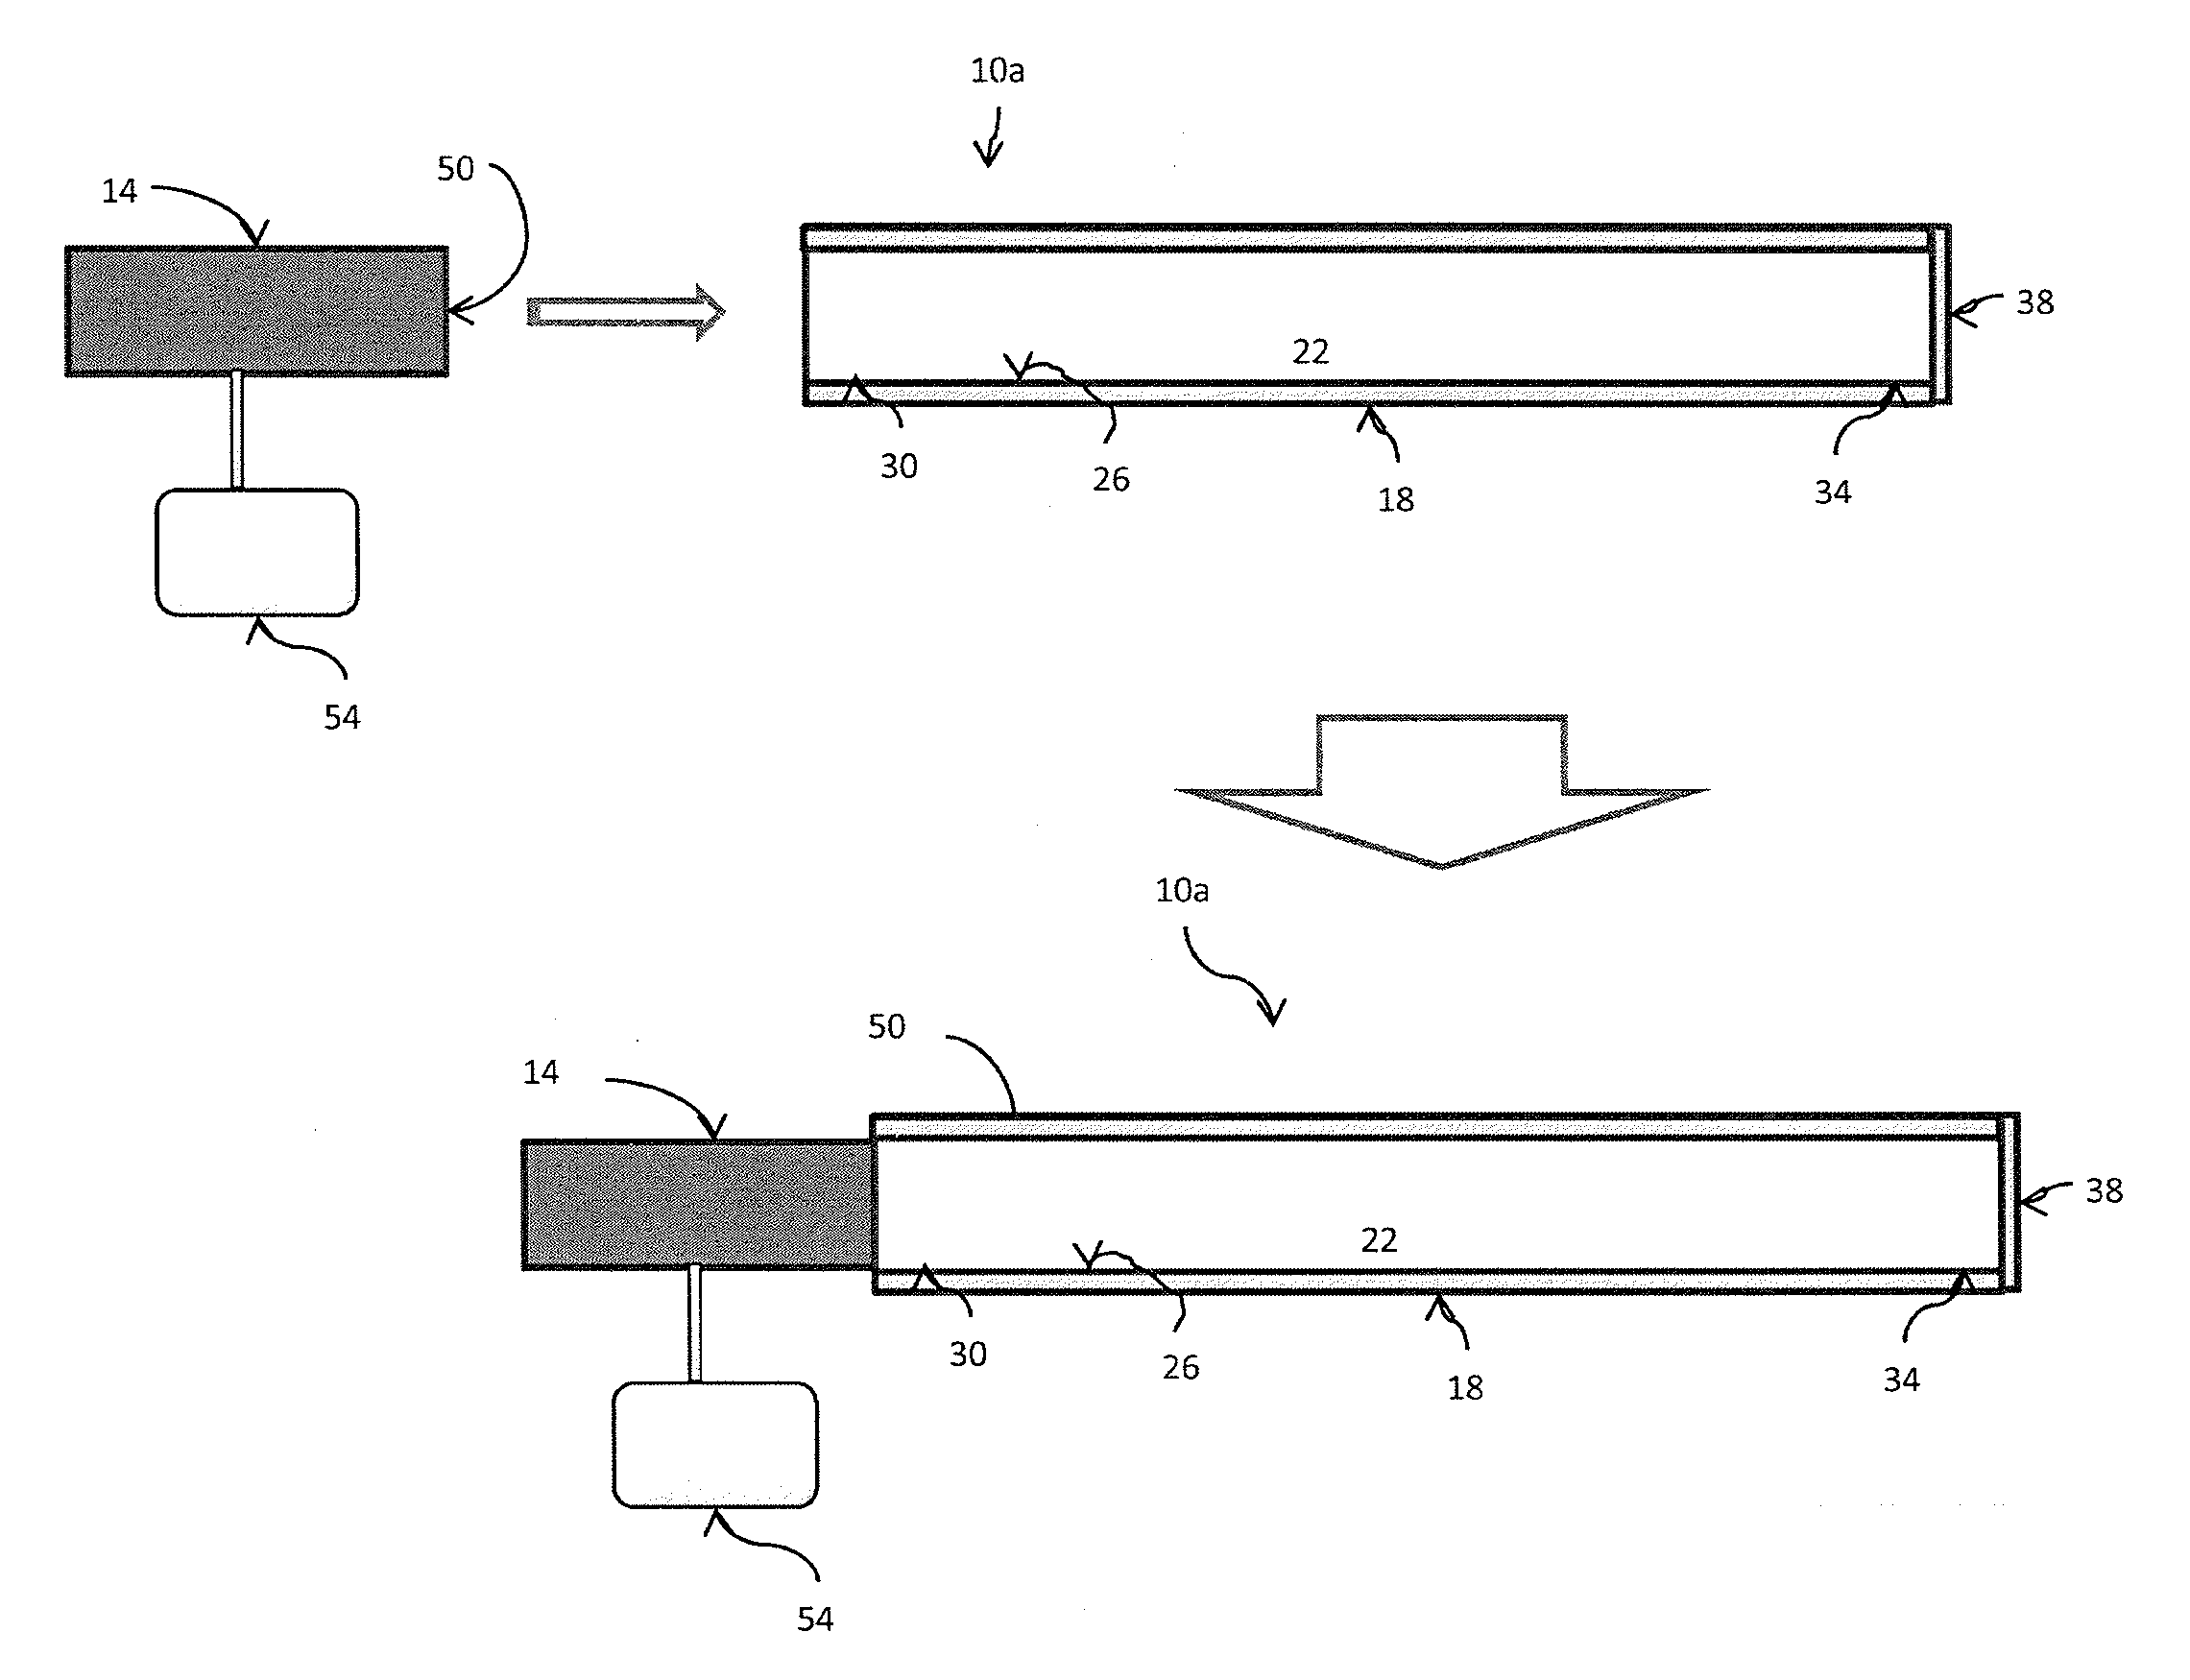 Apparatus for generating therapeutic shockwaves and applications of same